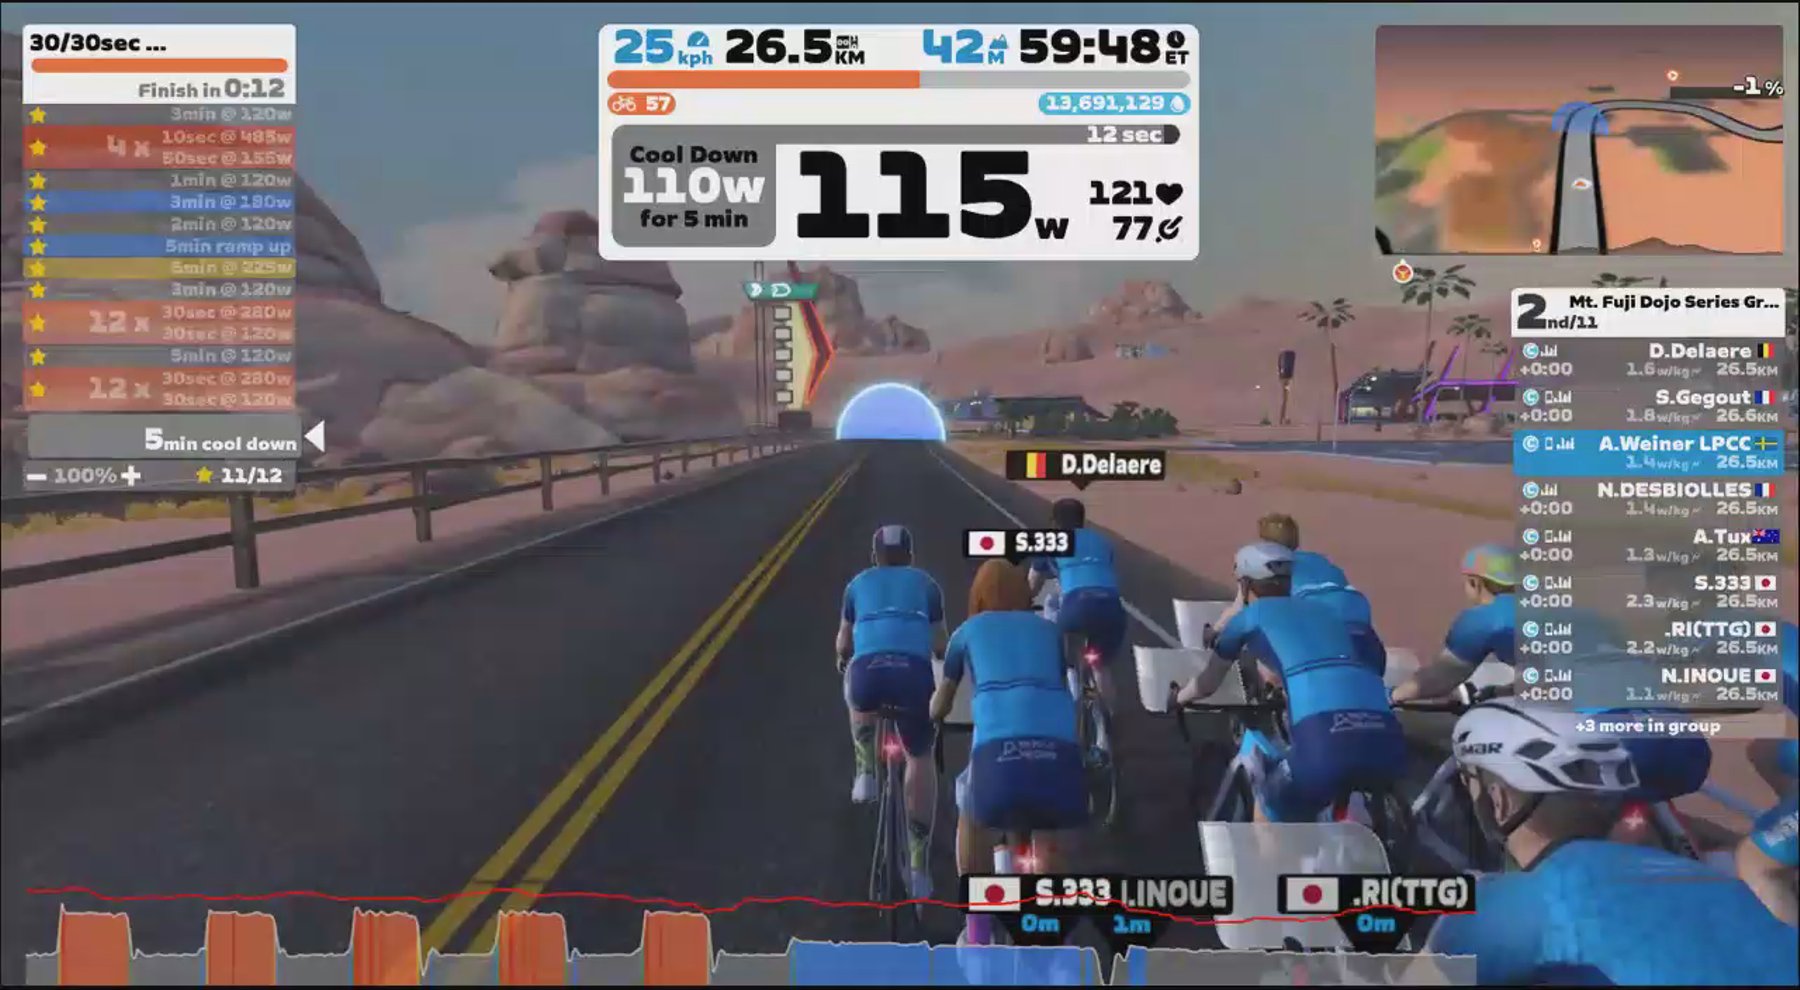 Zwift - Group Workout: TT TUNE-UP 30/30SEC ANAEROBIC #2 - English  on Tempus Fugit in Watopia